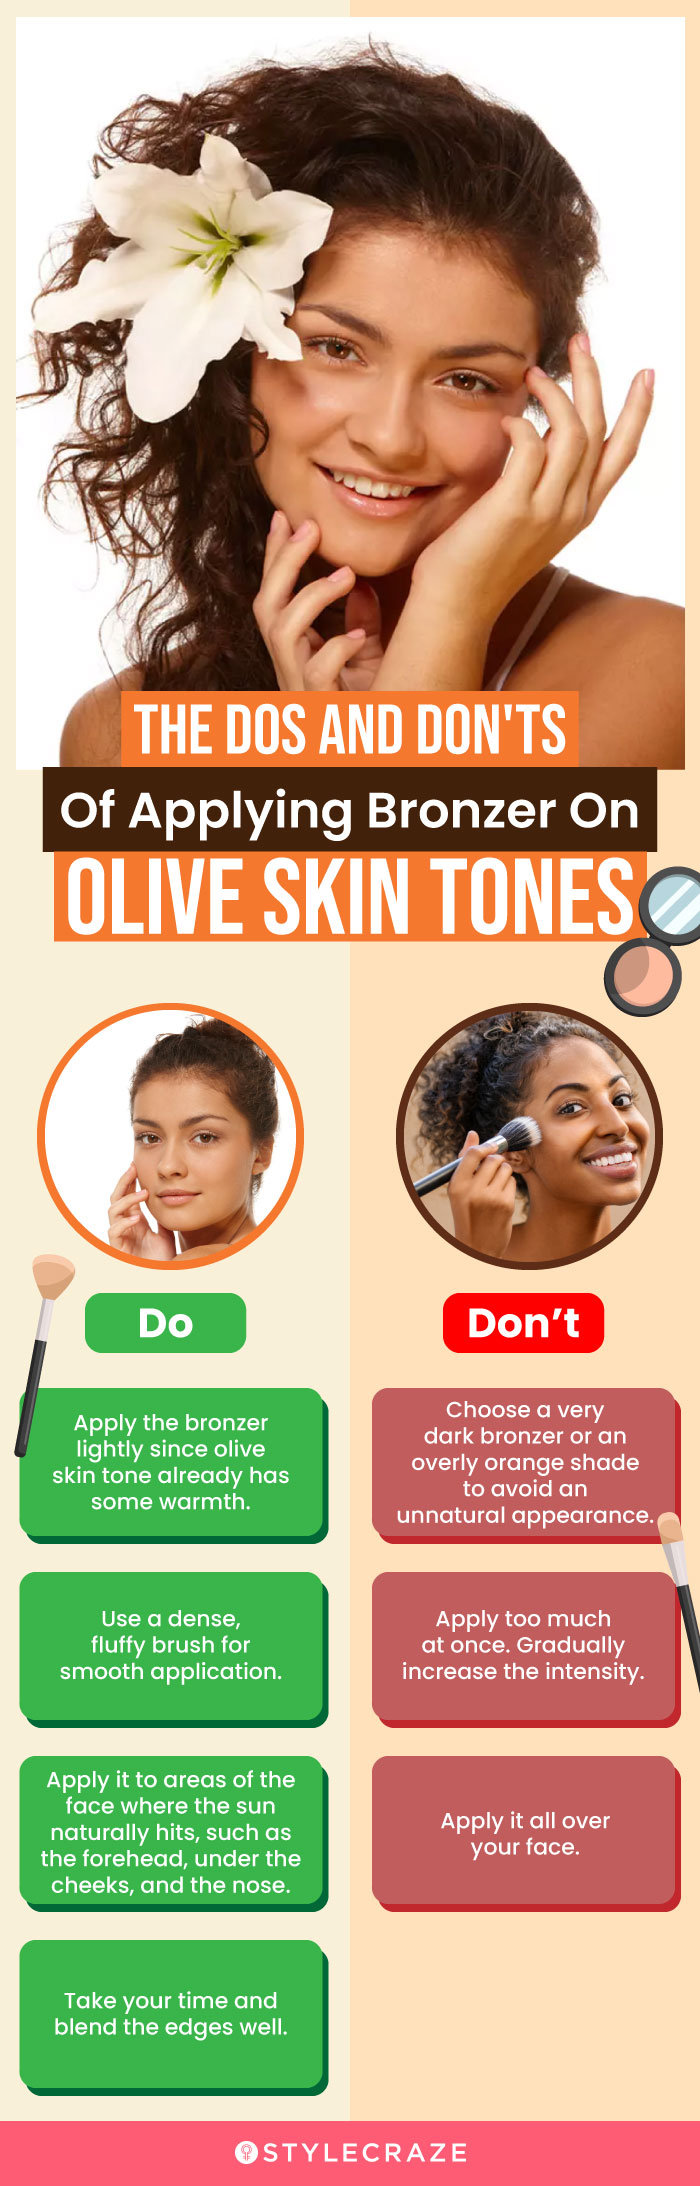 Do's And Don'ts For Applying Bronzer On Olive Skin Tone (infographic)